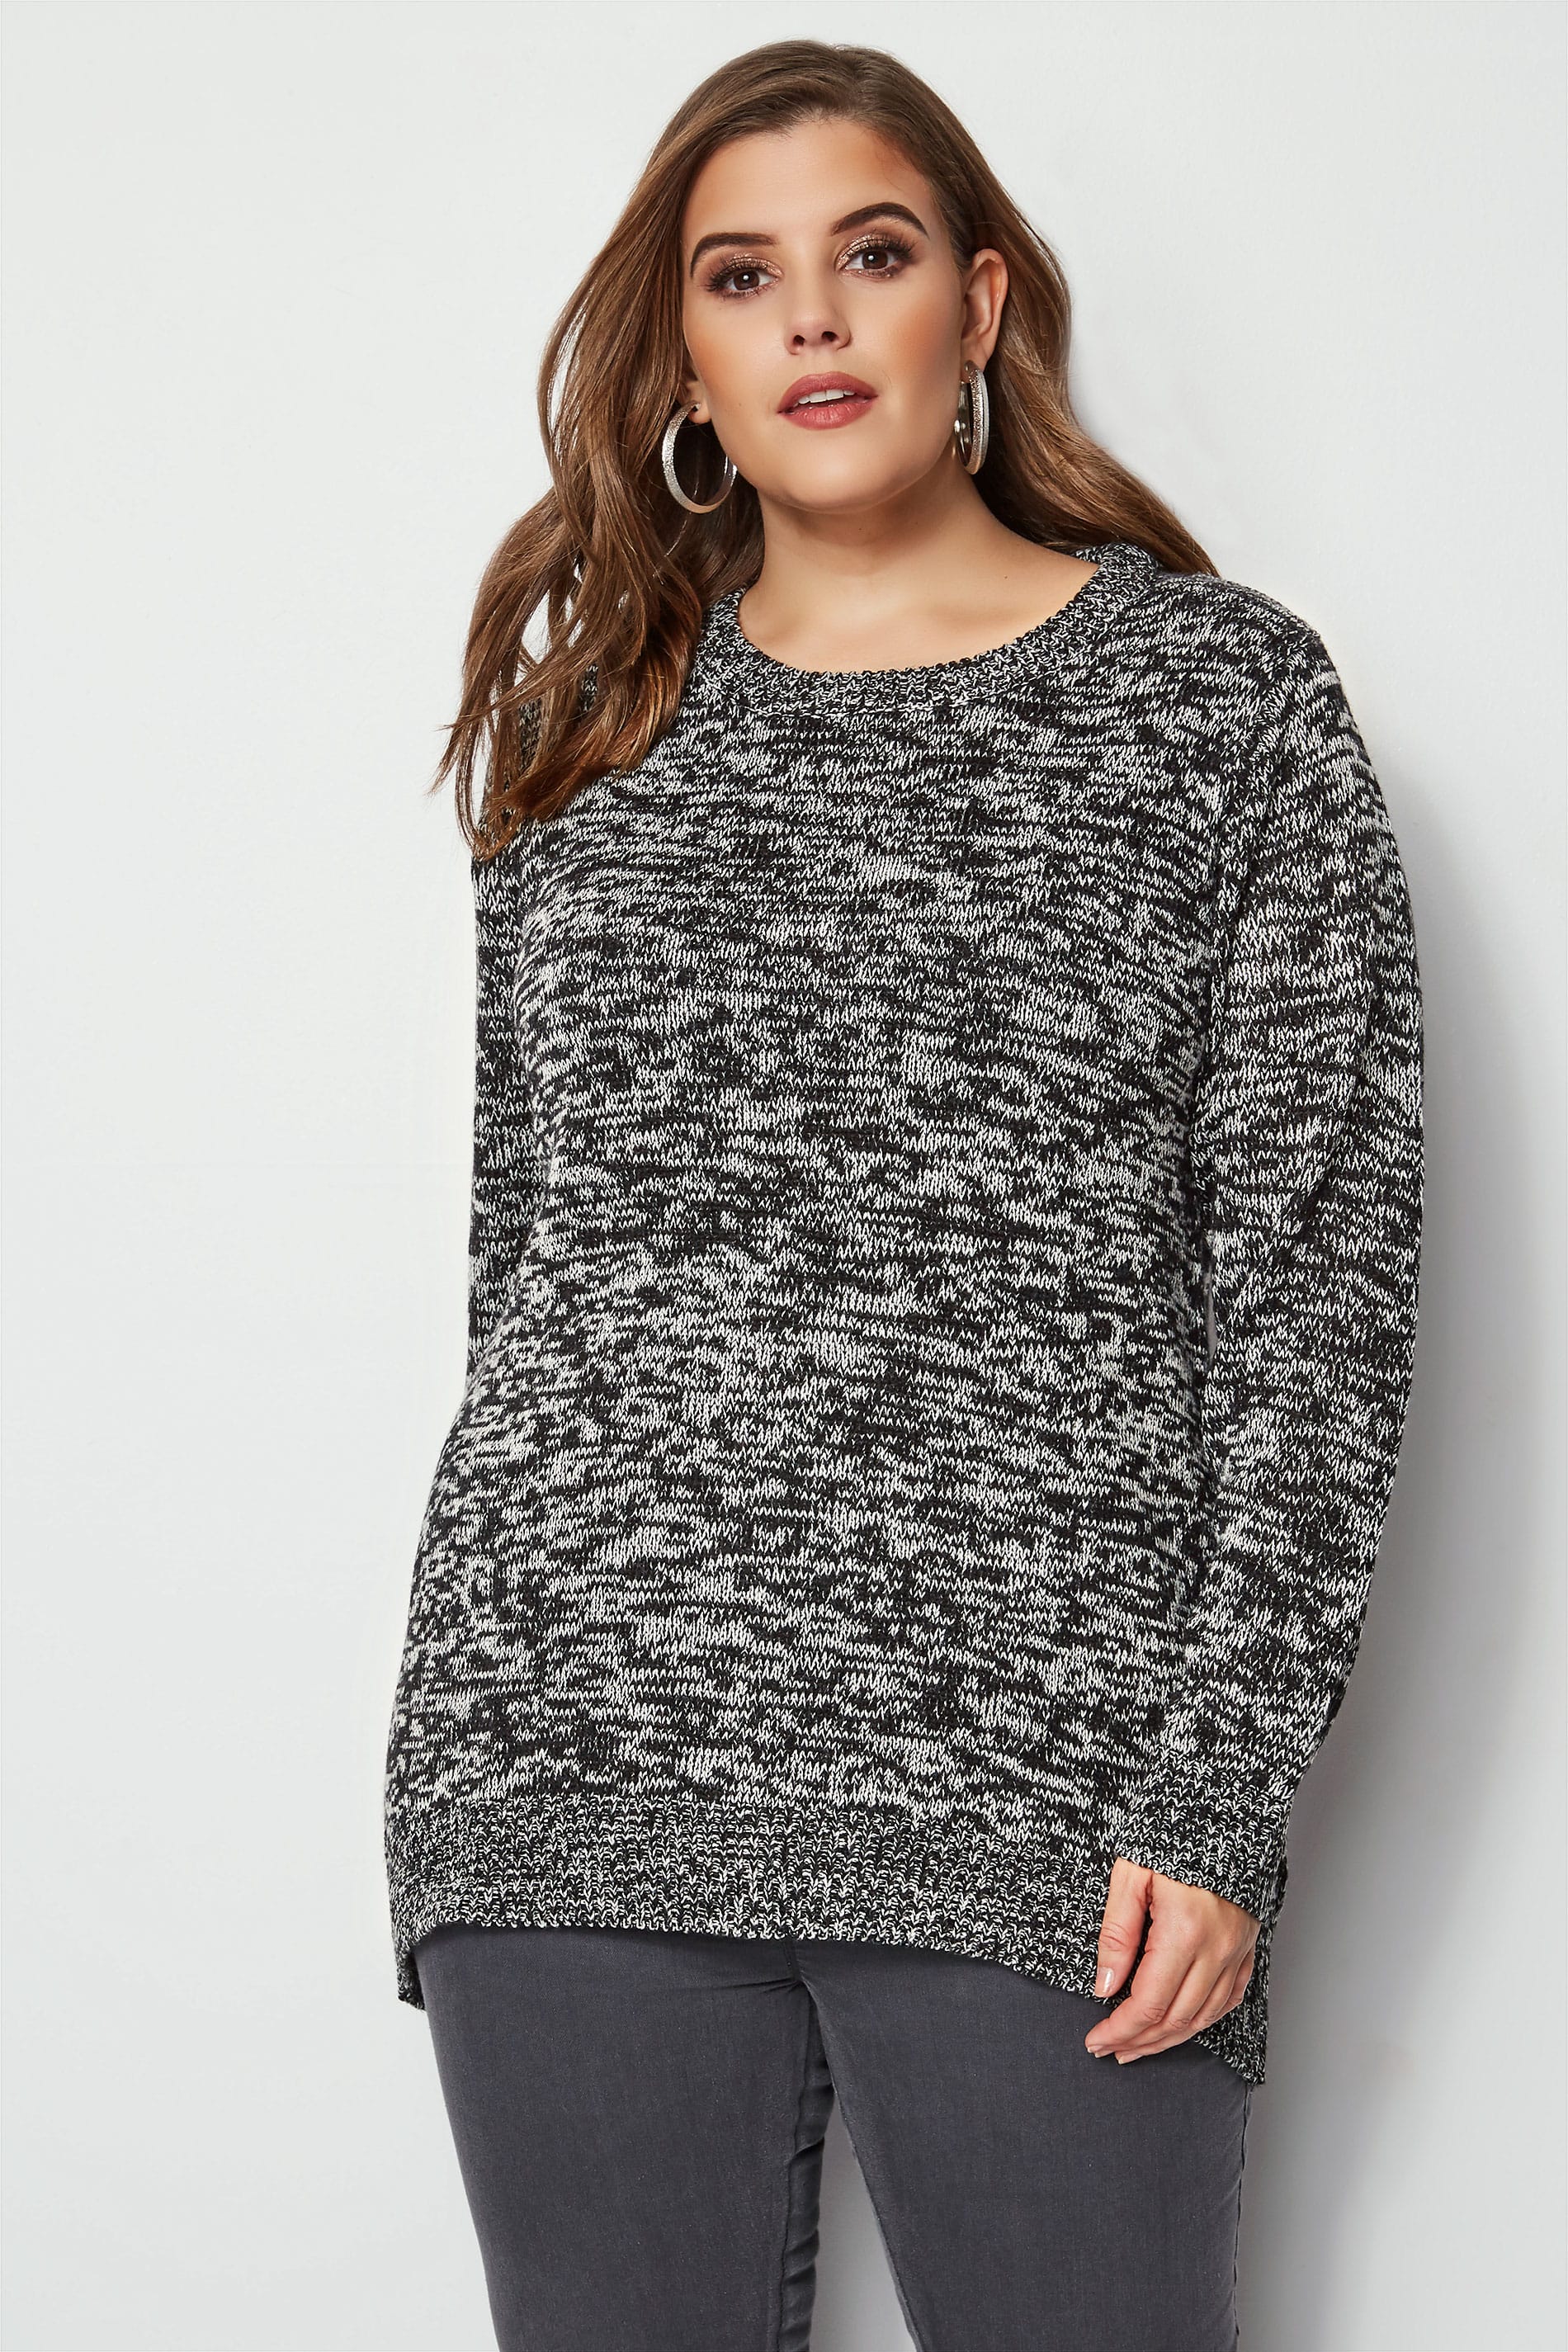 Black & Grey Twist Knitted Jumper, plus size 16 to 36